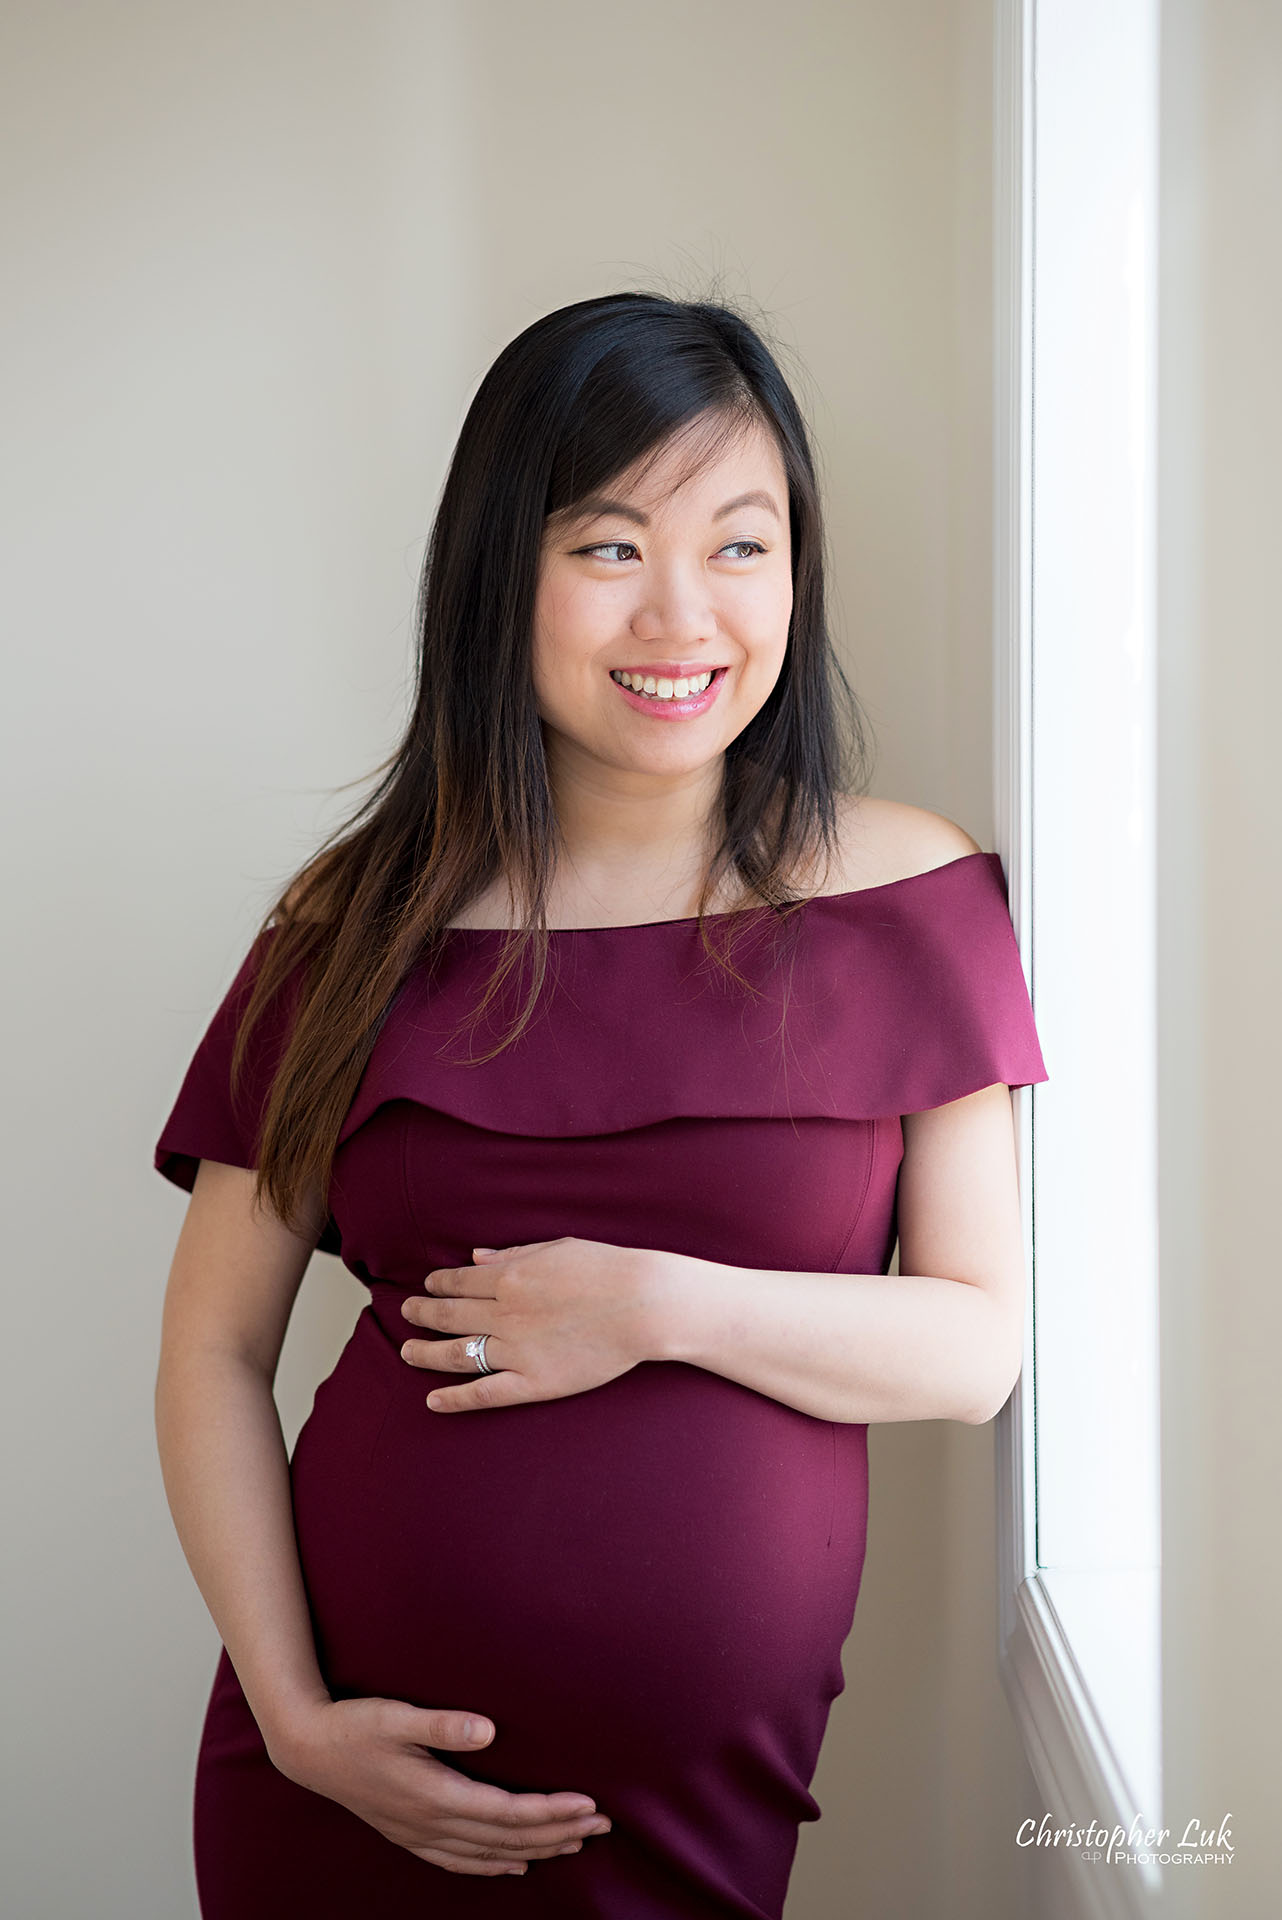 Christopher Luk Toronto Wedding Family Maternity Photographer - Markham Richmond Hill Toronto Natural Candid Photojournalistic Mom Baby Bump Baby Pregnant Pregnancy Smile Belly Window Vertical